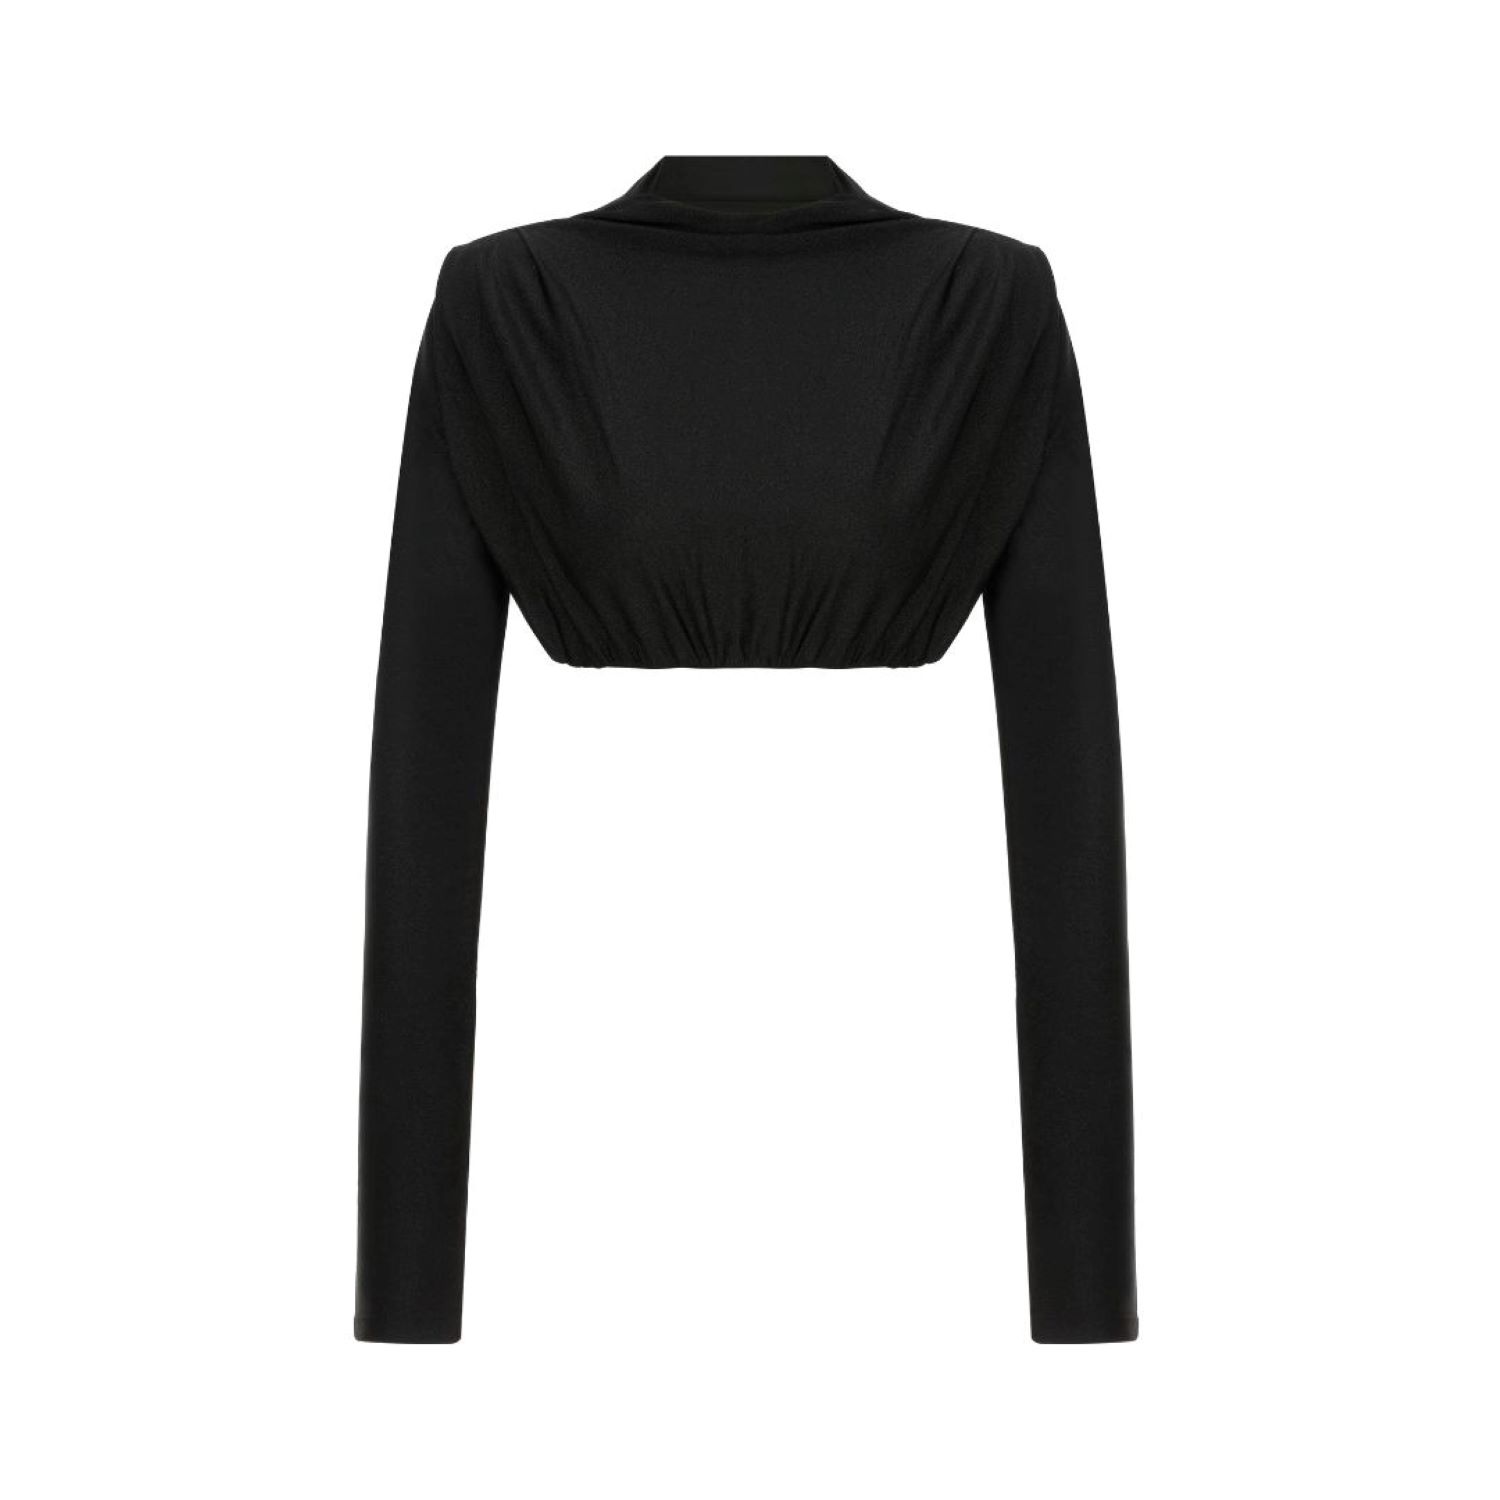 Women’s Black Ivy Top Extra Small Maeve